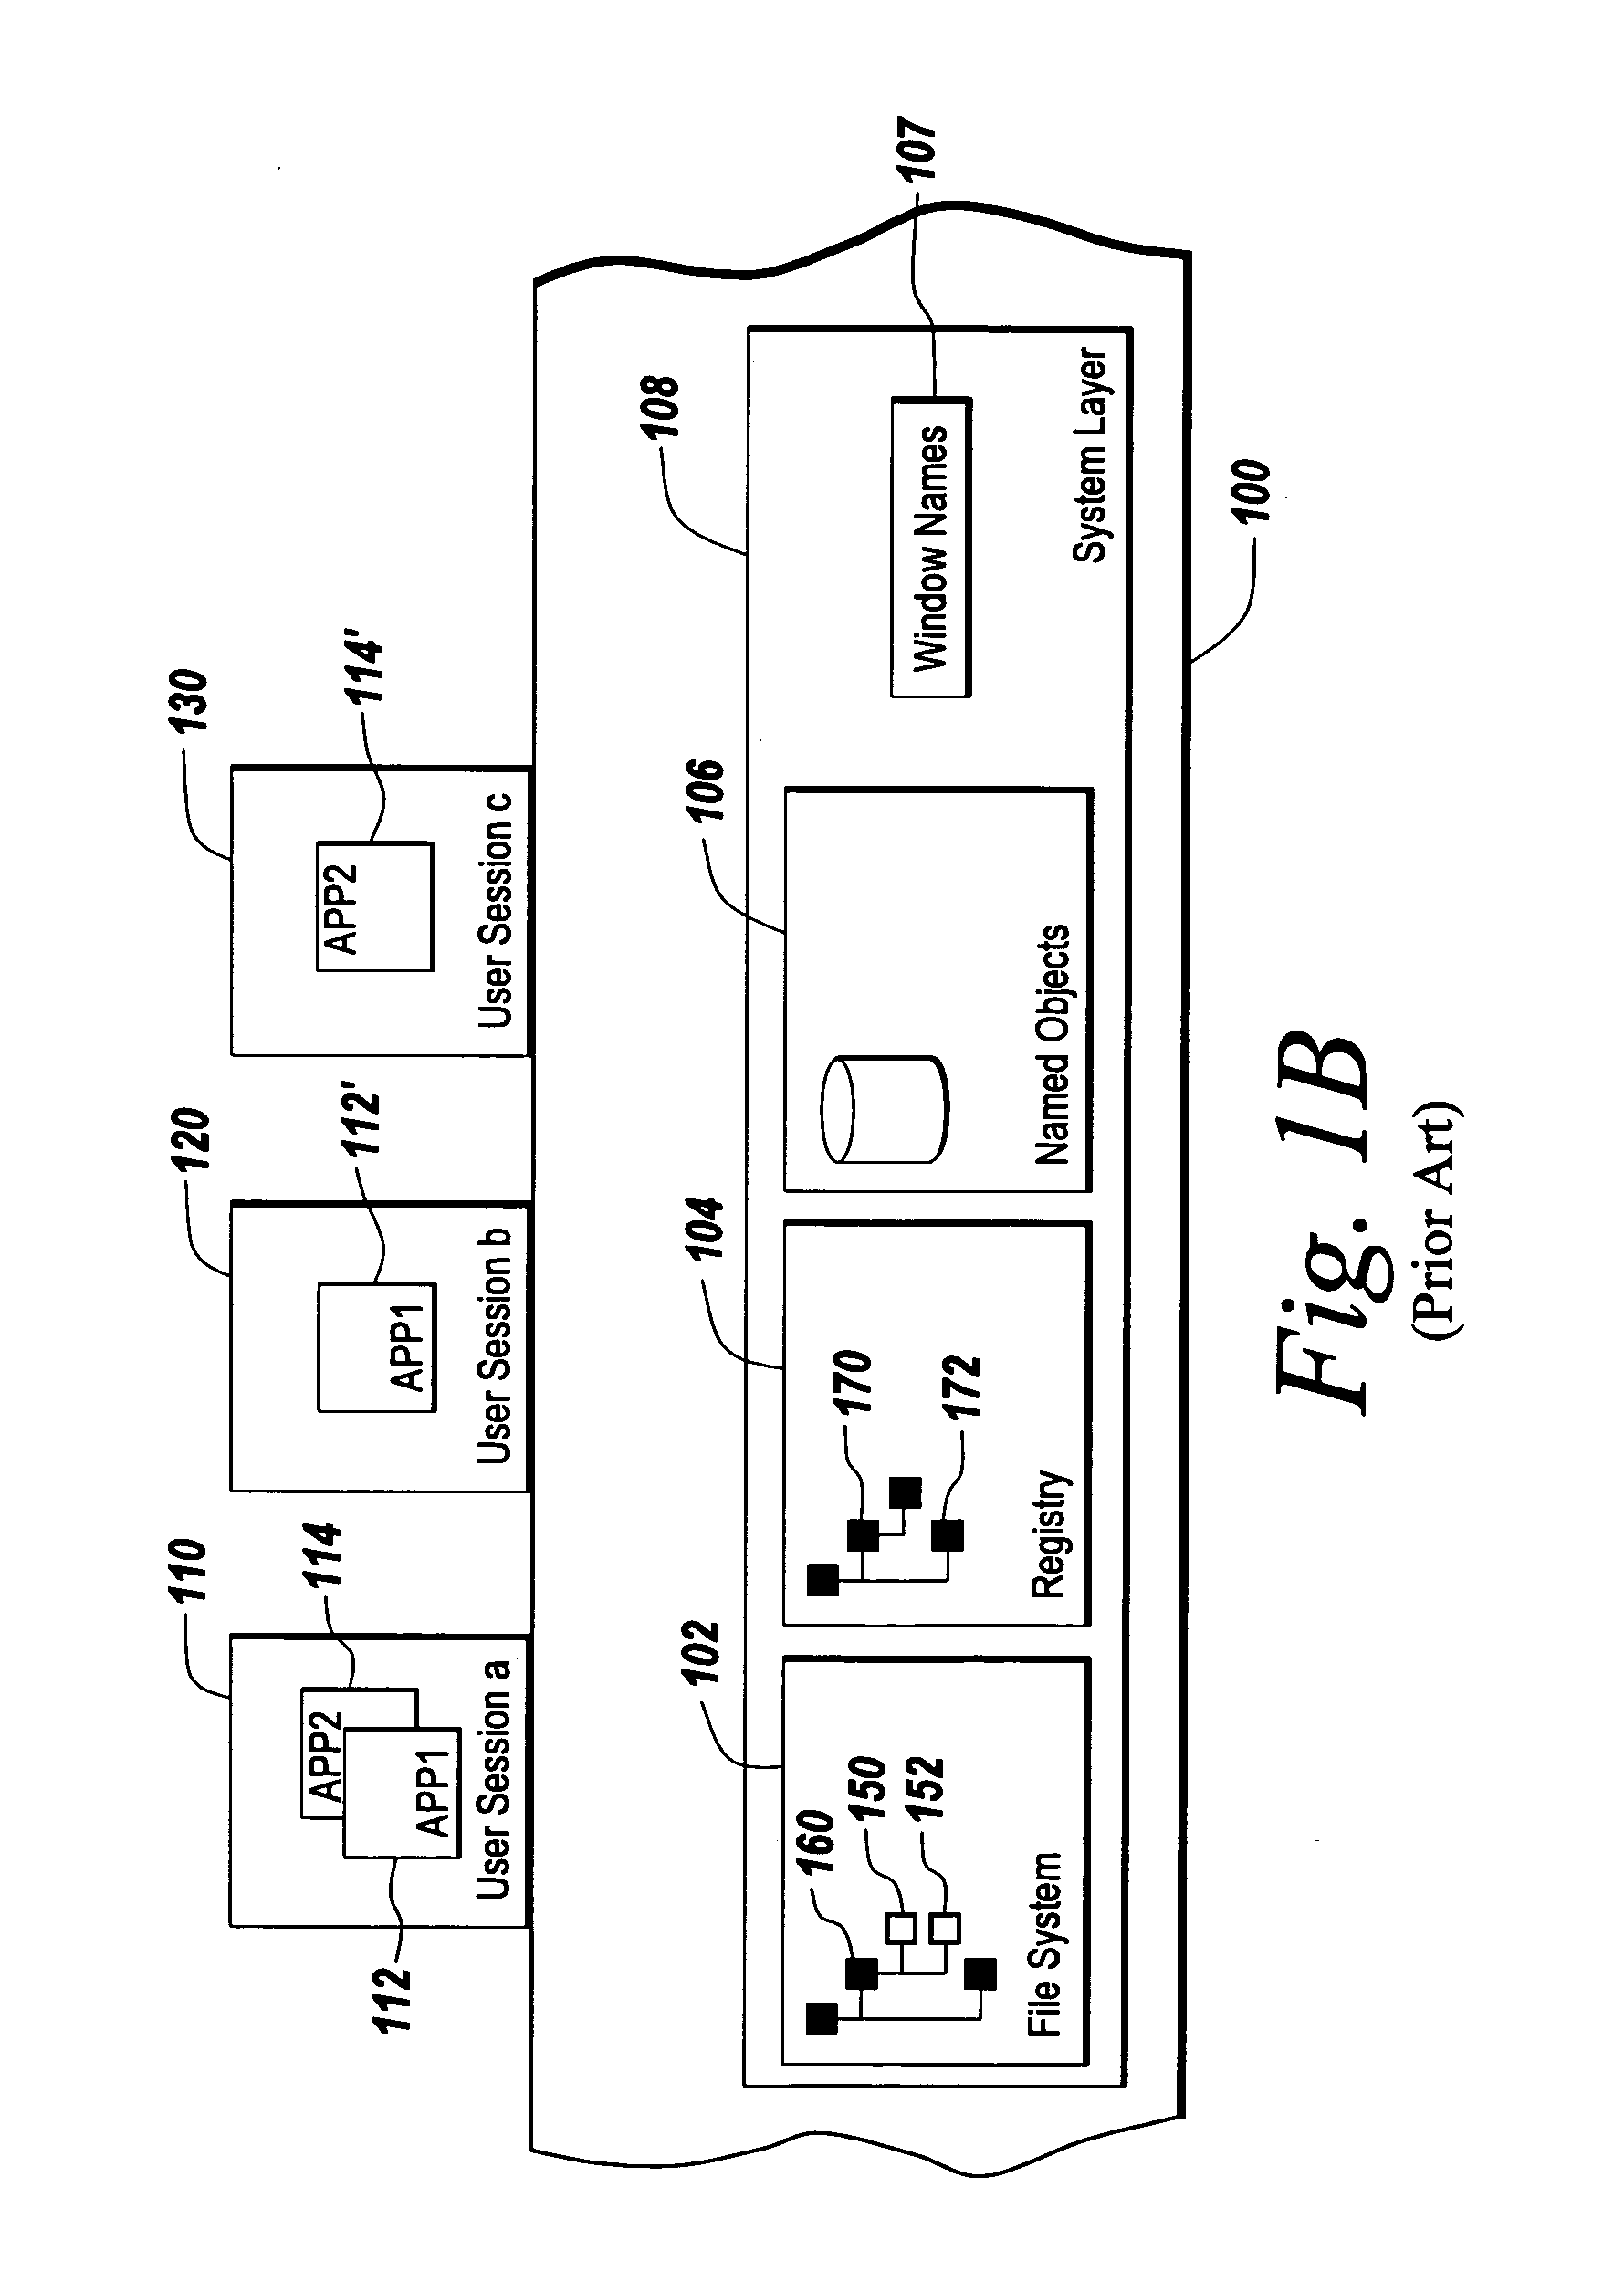 Method and apparatus for moving processes between isolation environments